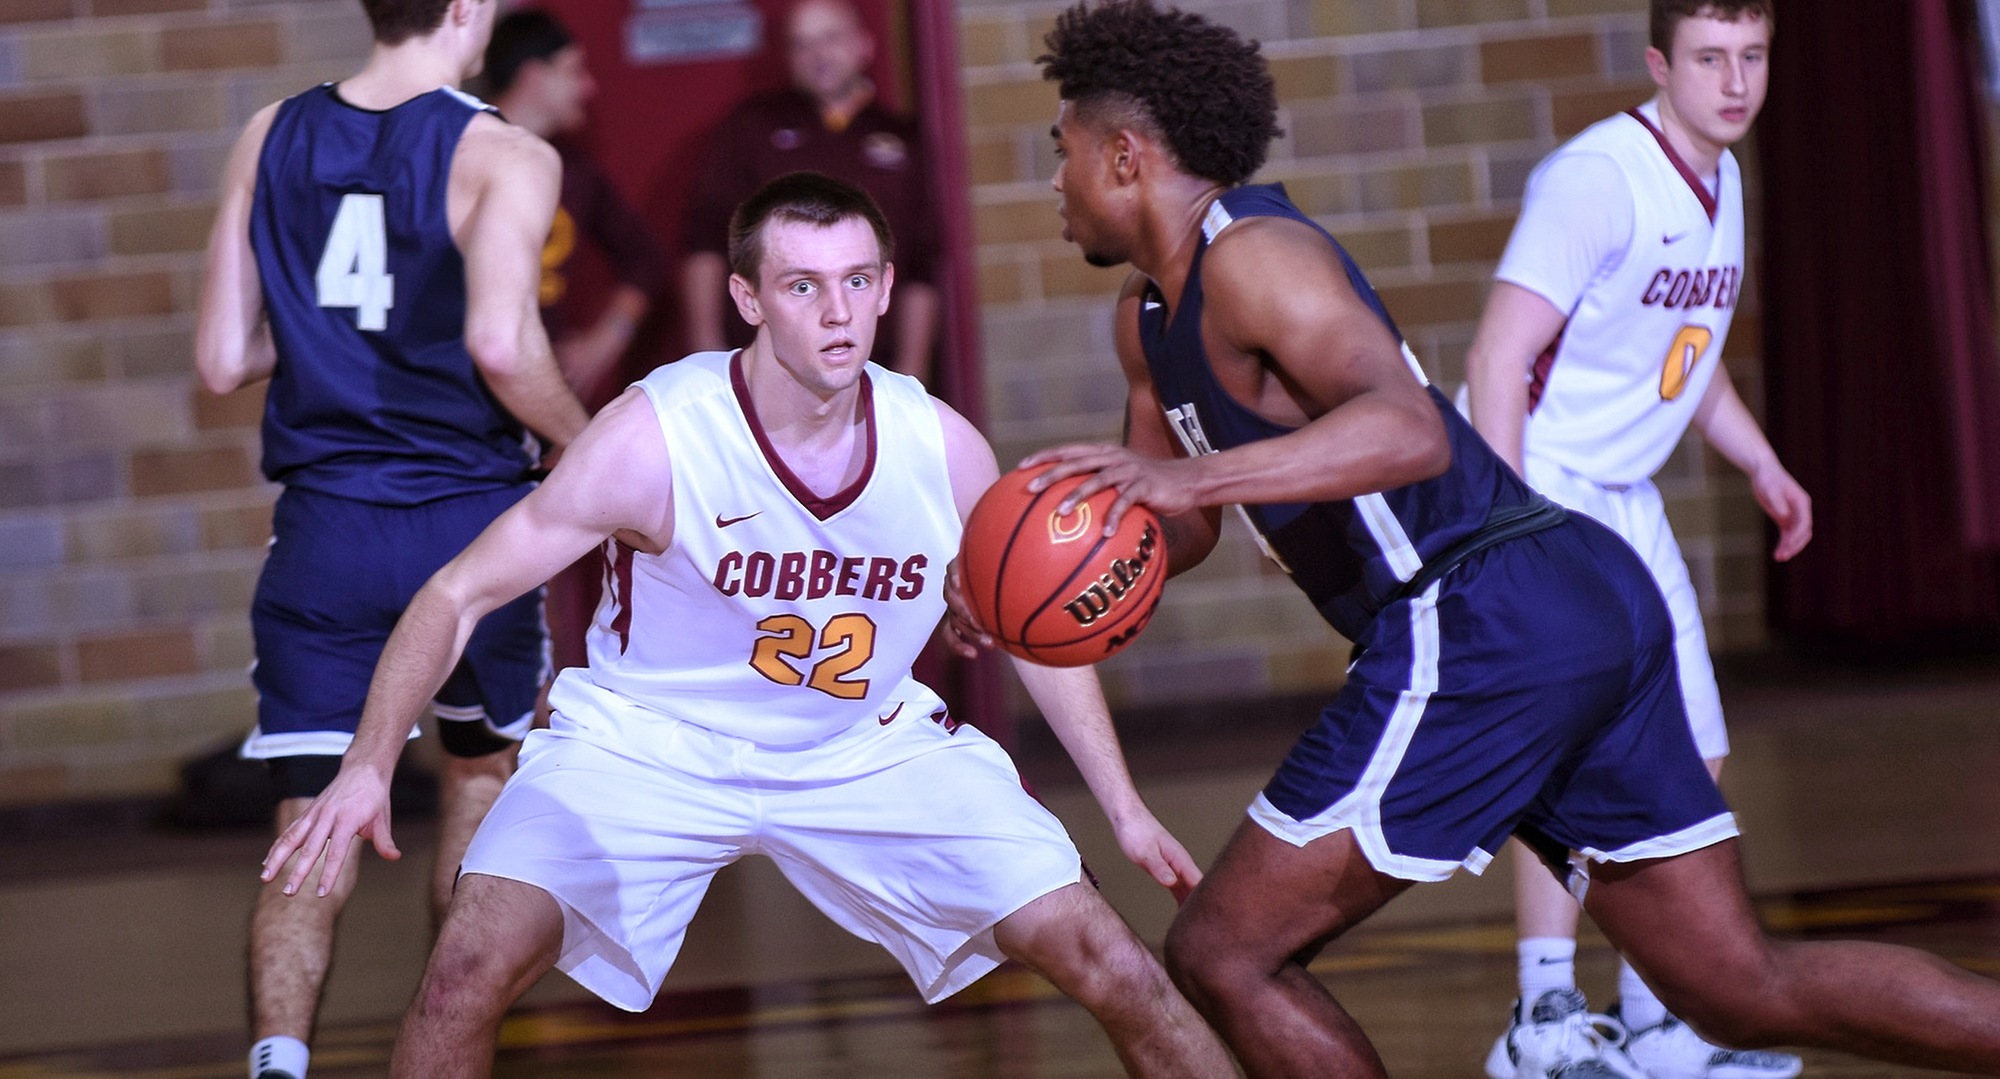 Junior Jacob Fredrickson scored a career-high 15 points in the Cobbers' game with Bethel.